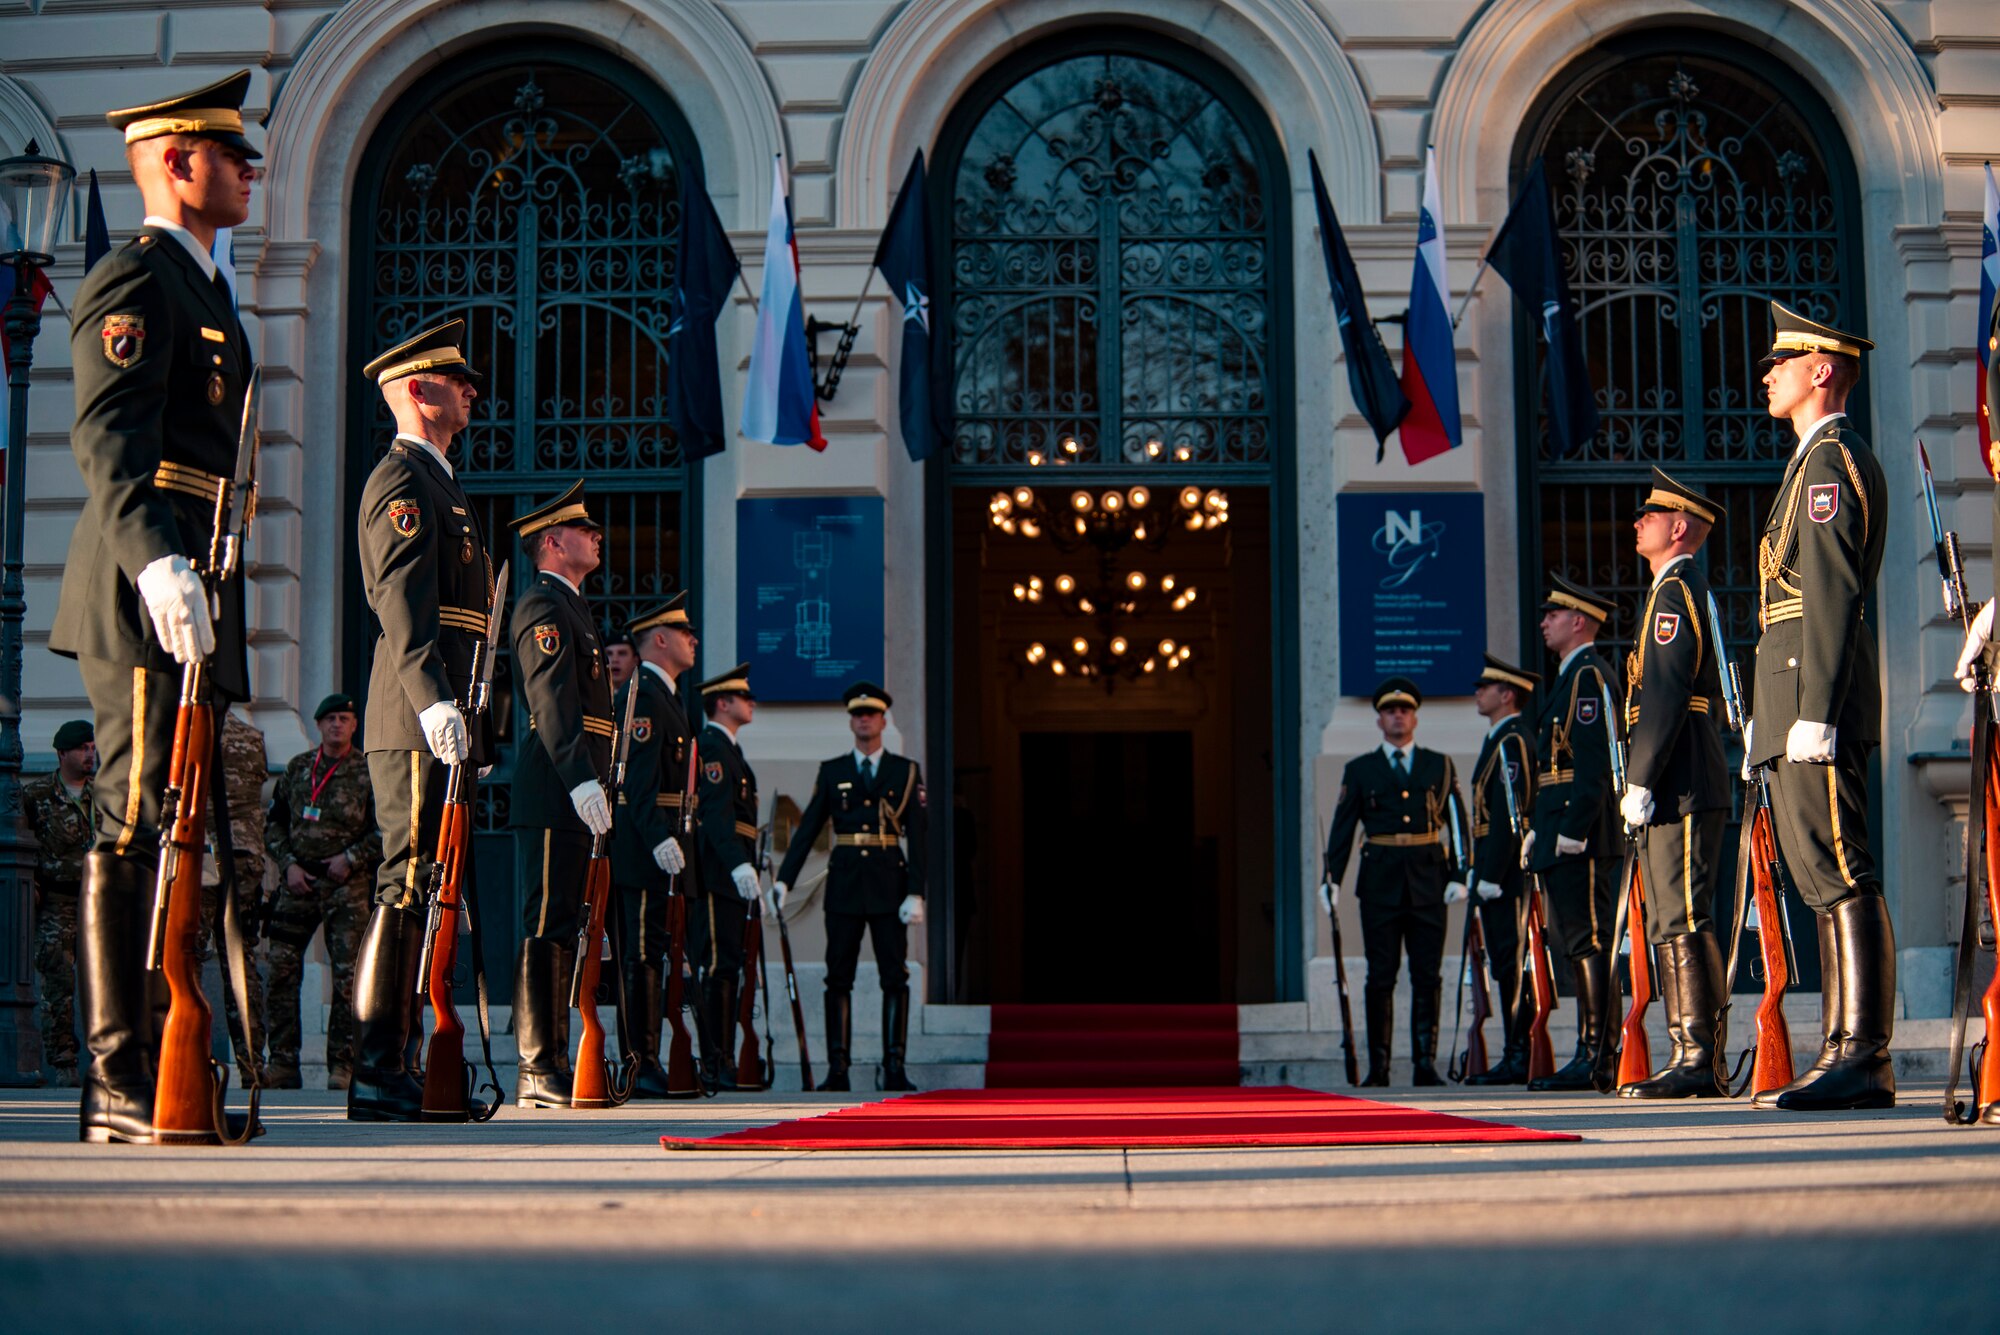 Troops flank a red carpet outside an ornate building entrance.